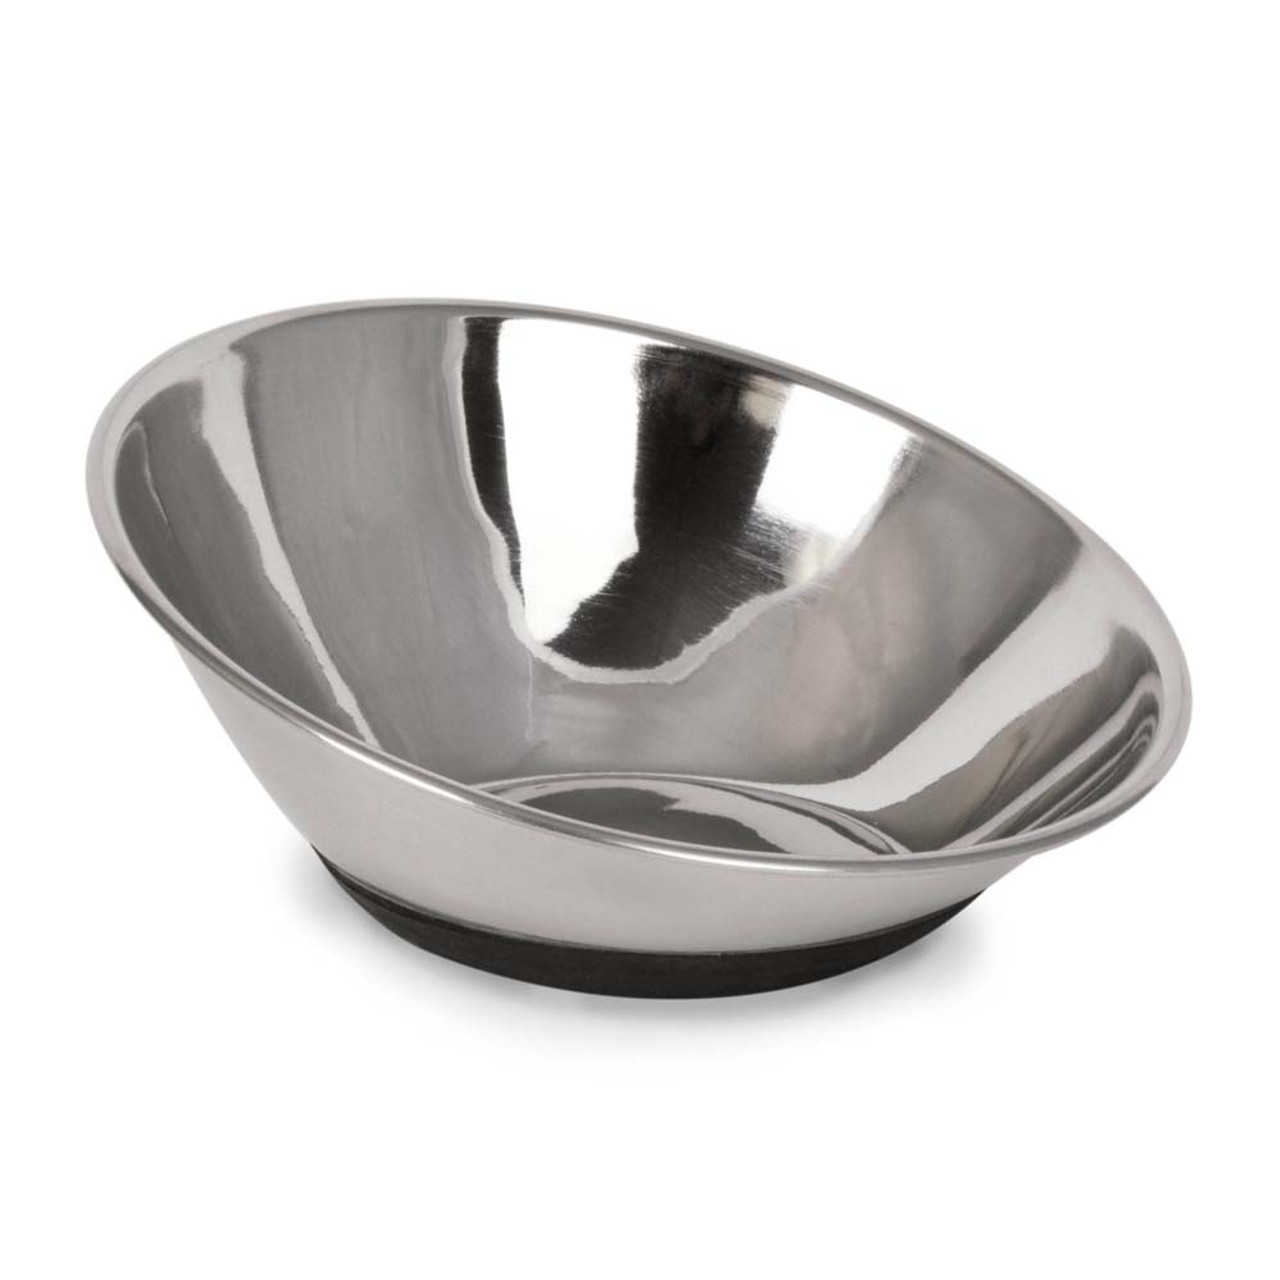 Small Rubber Mixing Bowl